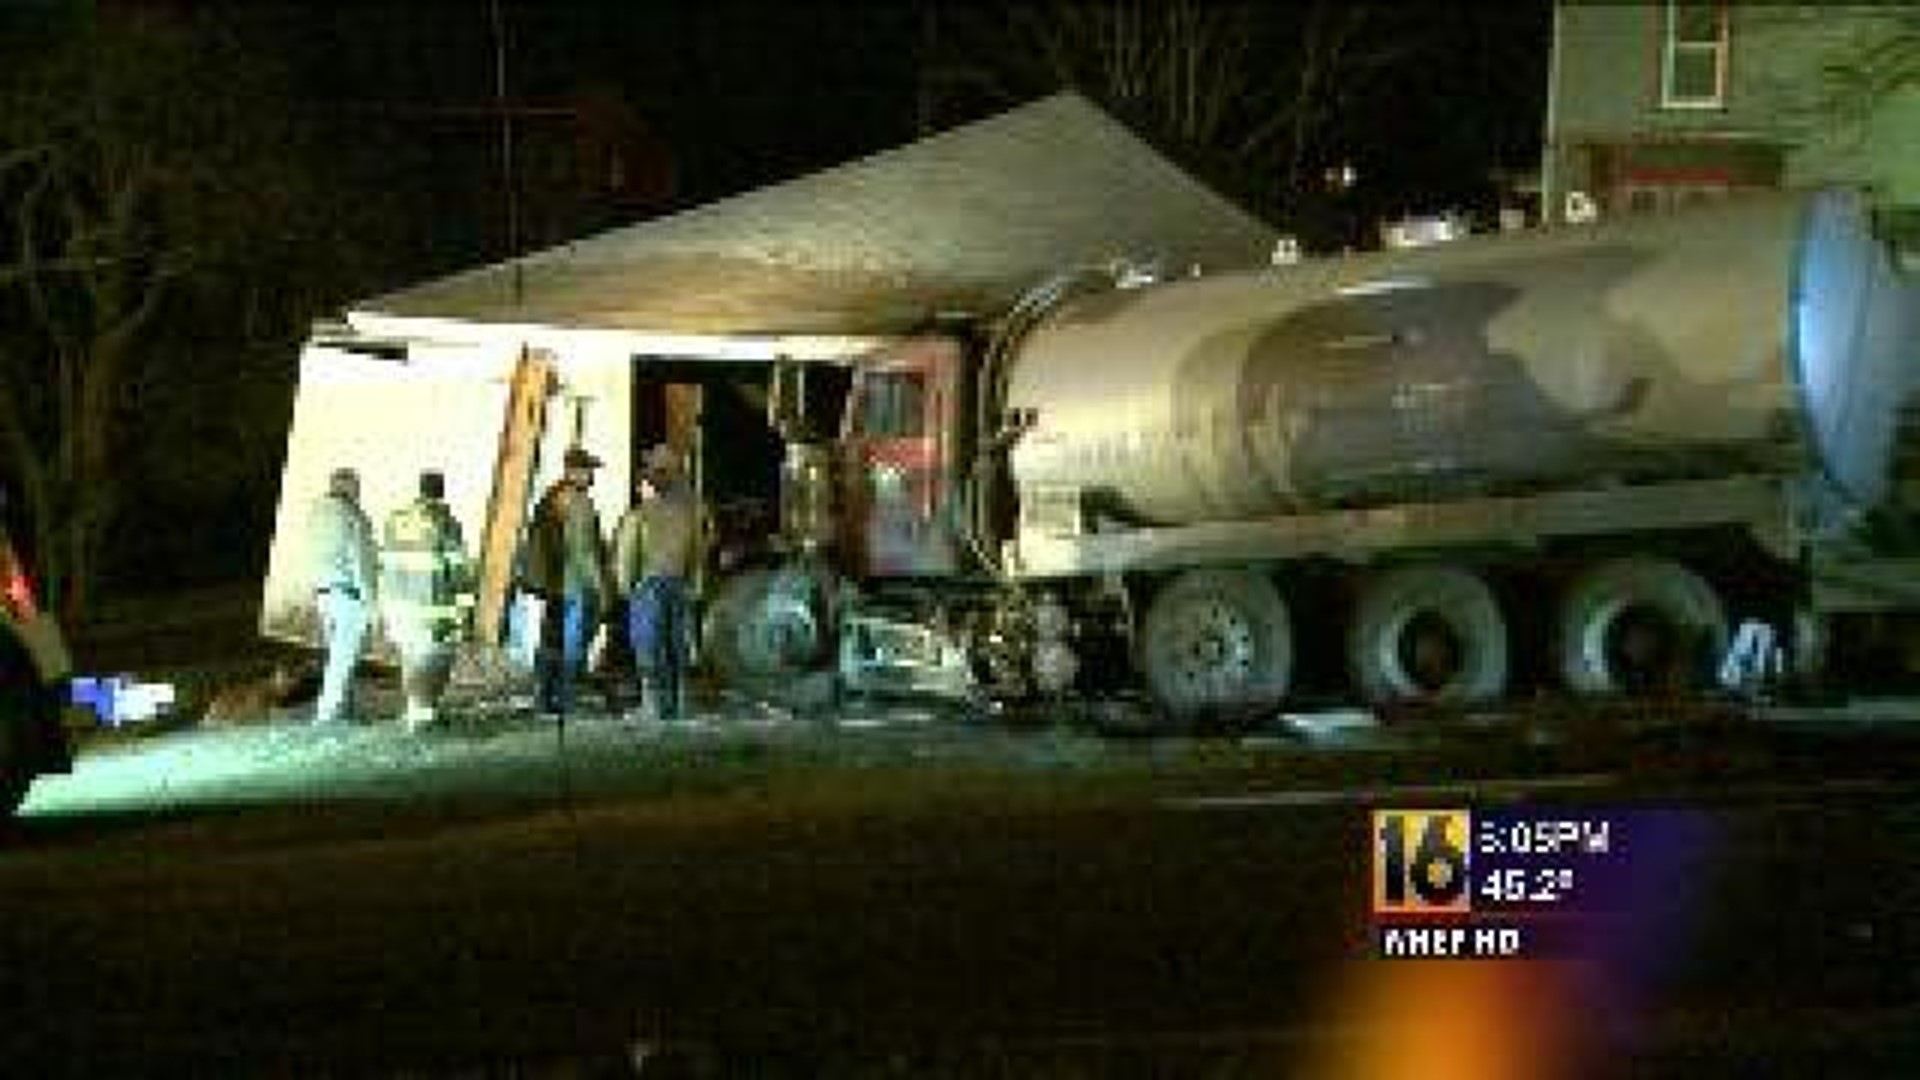 Truck Smashes Home, Garage In Susquehanna County